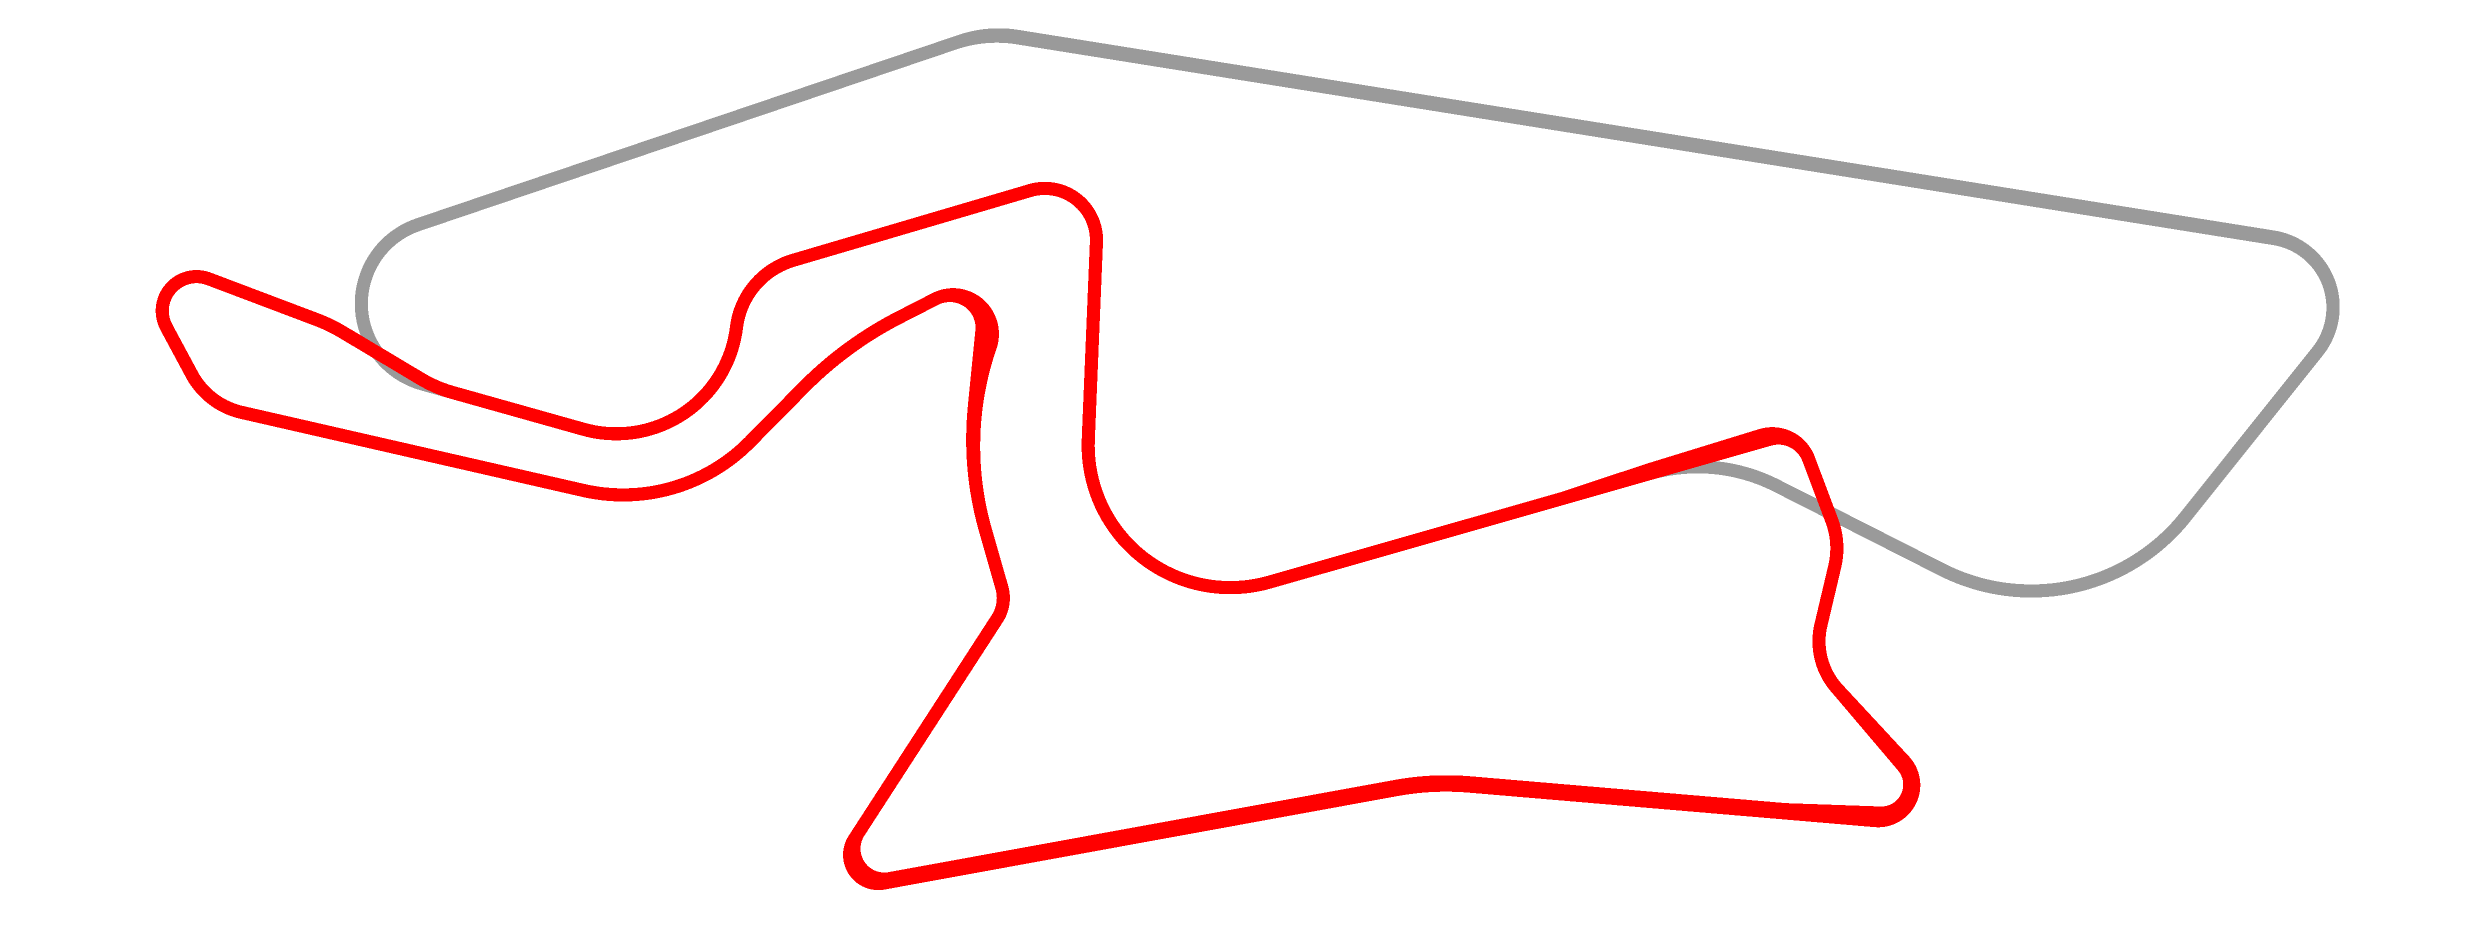 Kyalami Layout 3 Mei 2020 Red New.png